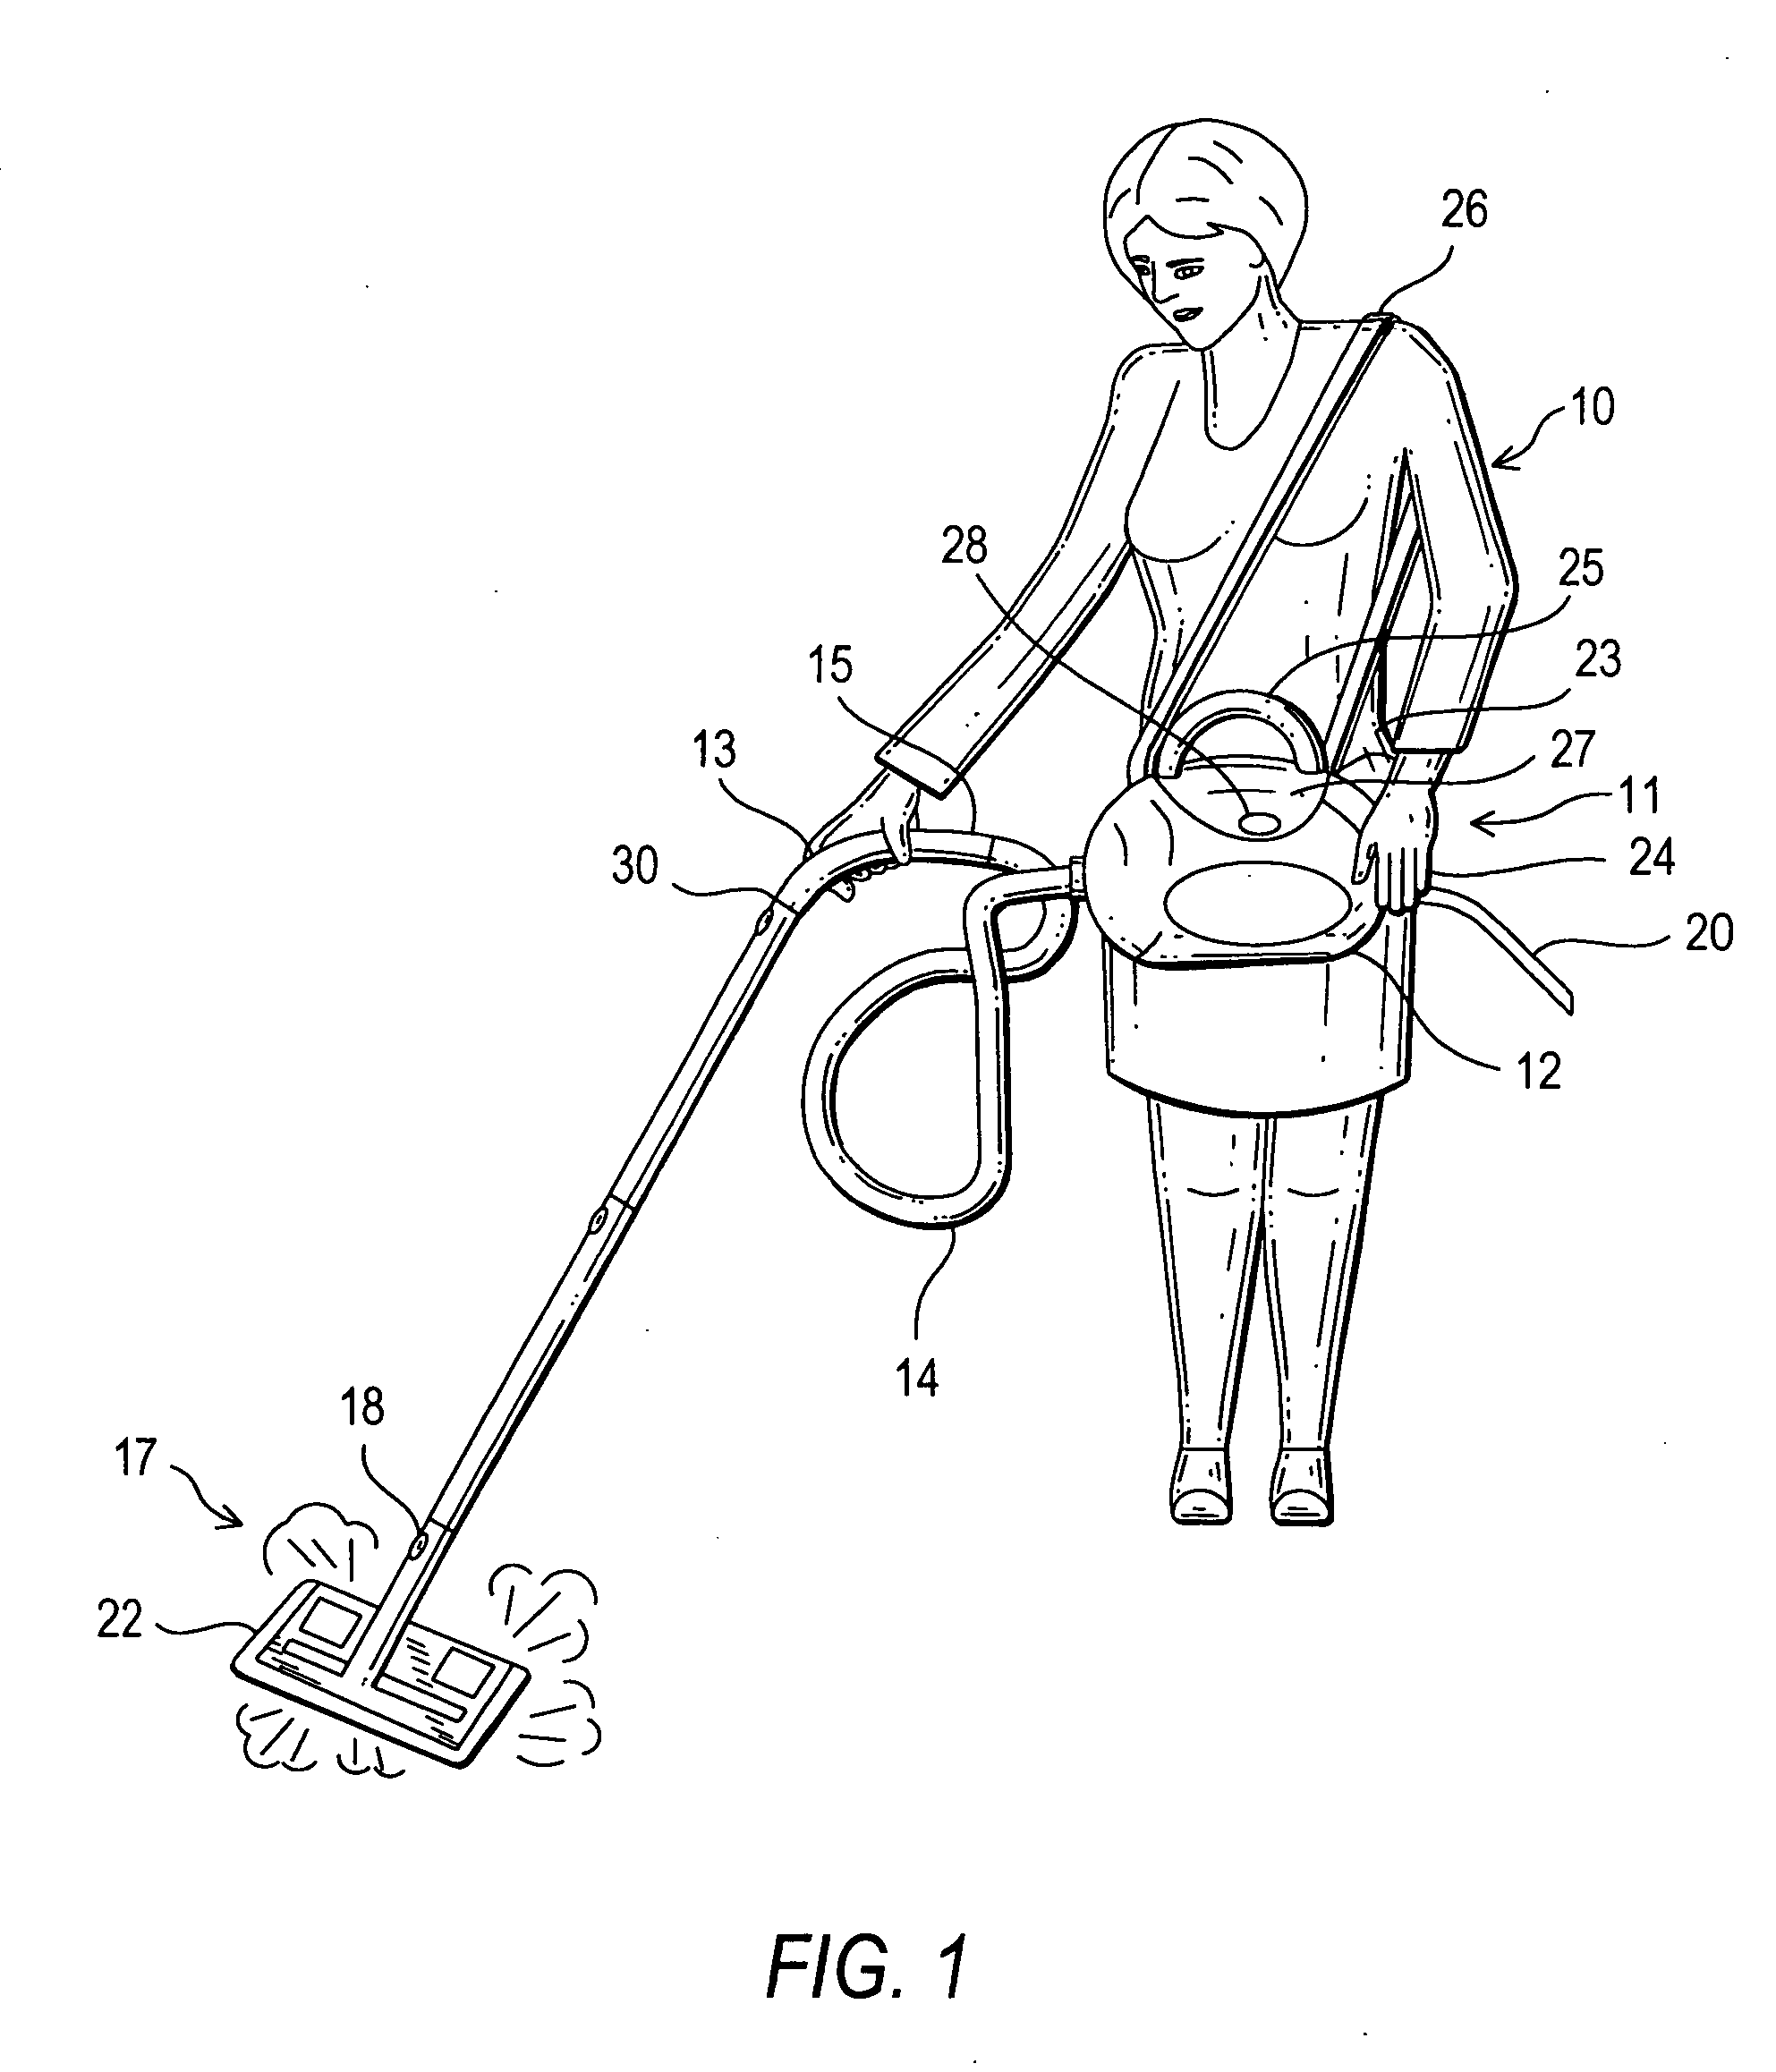 Fabric steam pocket and attachment for use with steam cleaner